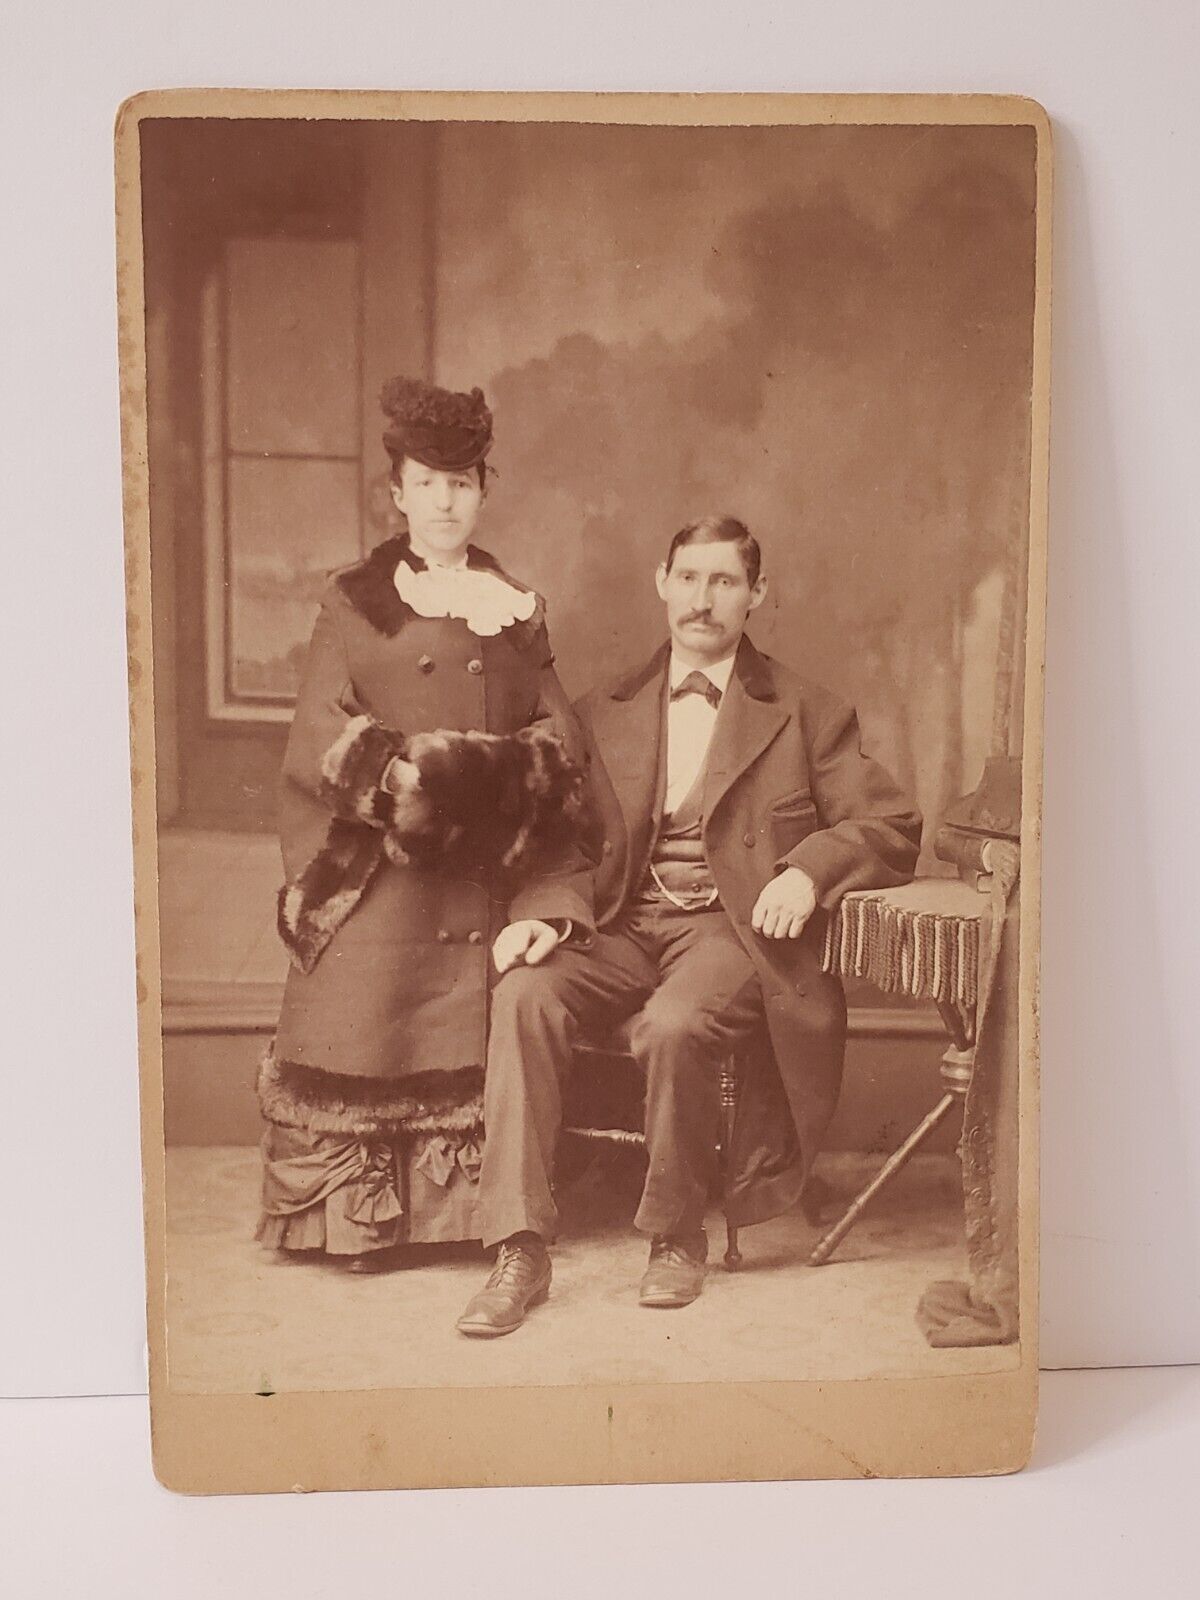 Antique Cabinet Card Photo of Handsome Couple | Great Period Dress | New York